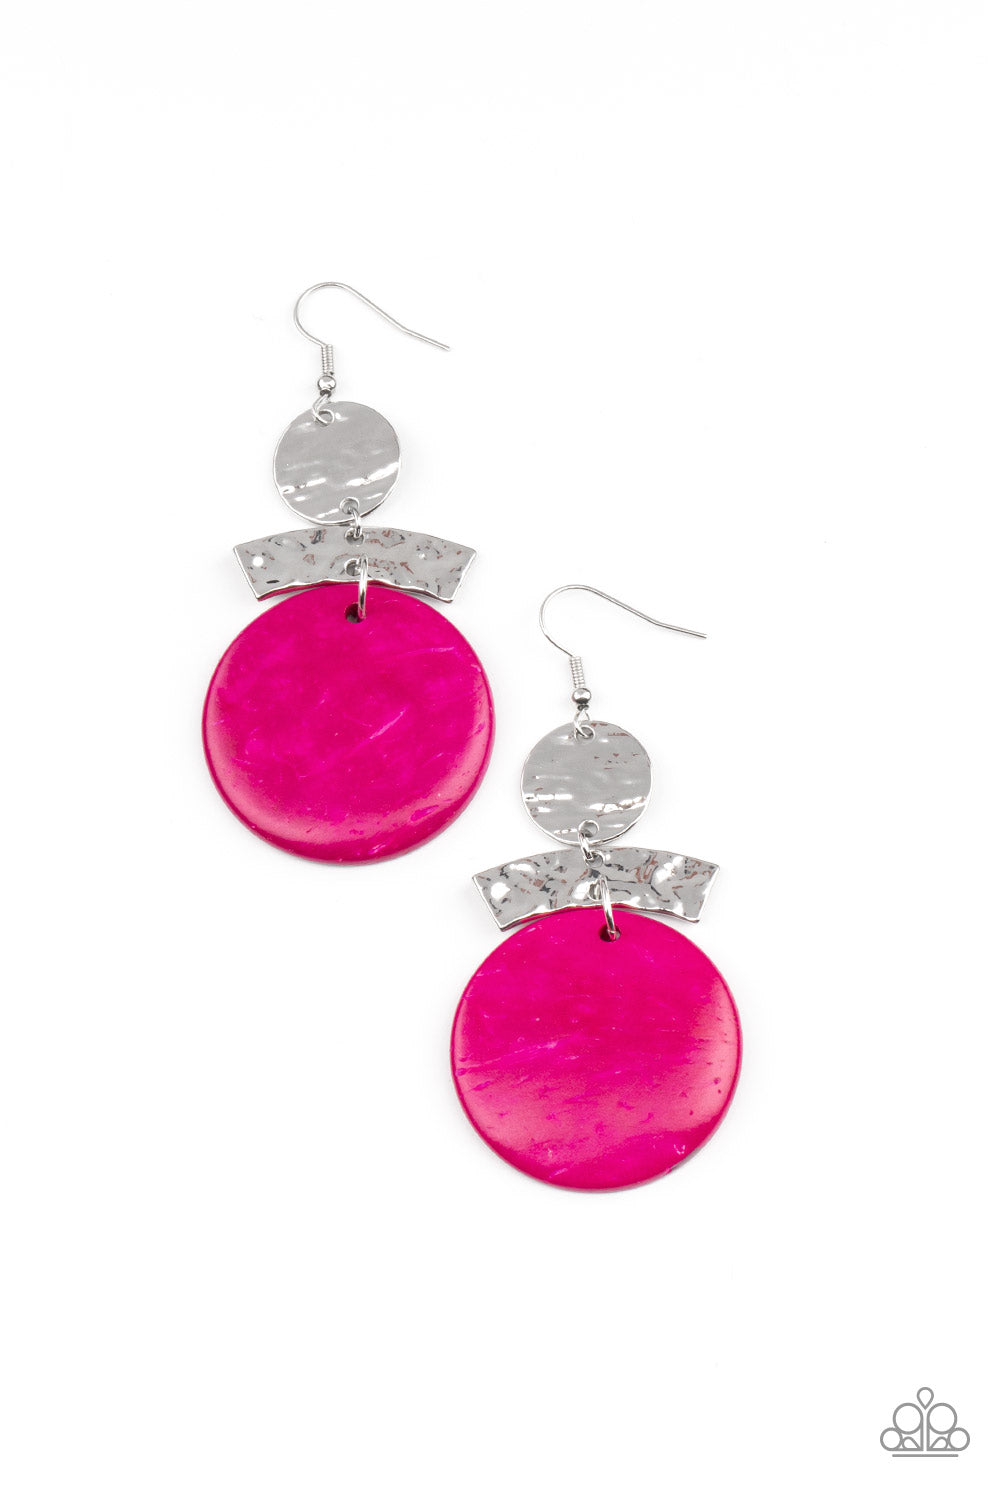 Paparazzi Accessories Diva of My Domain - Pink Earrings - Lady T Accessories